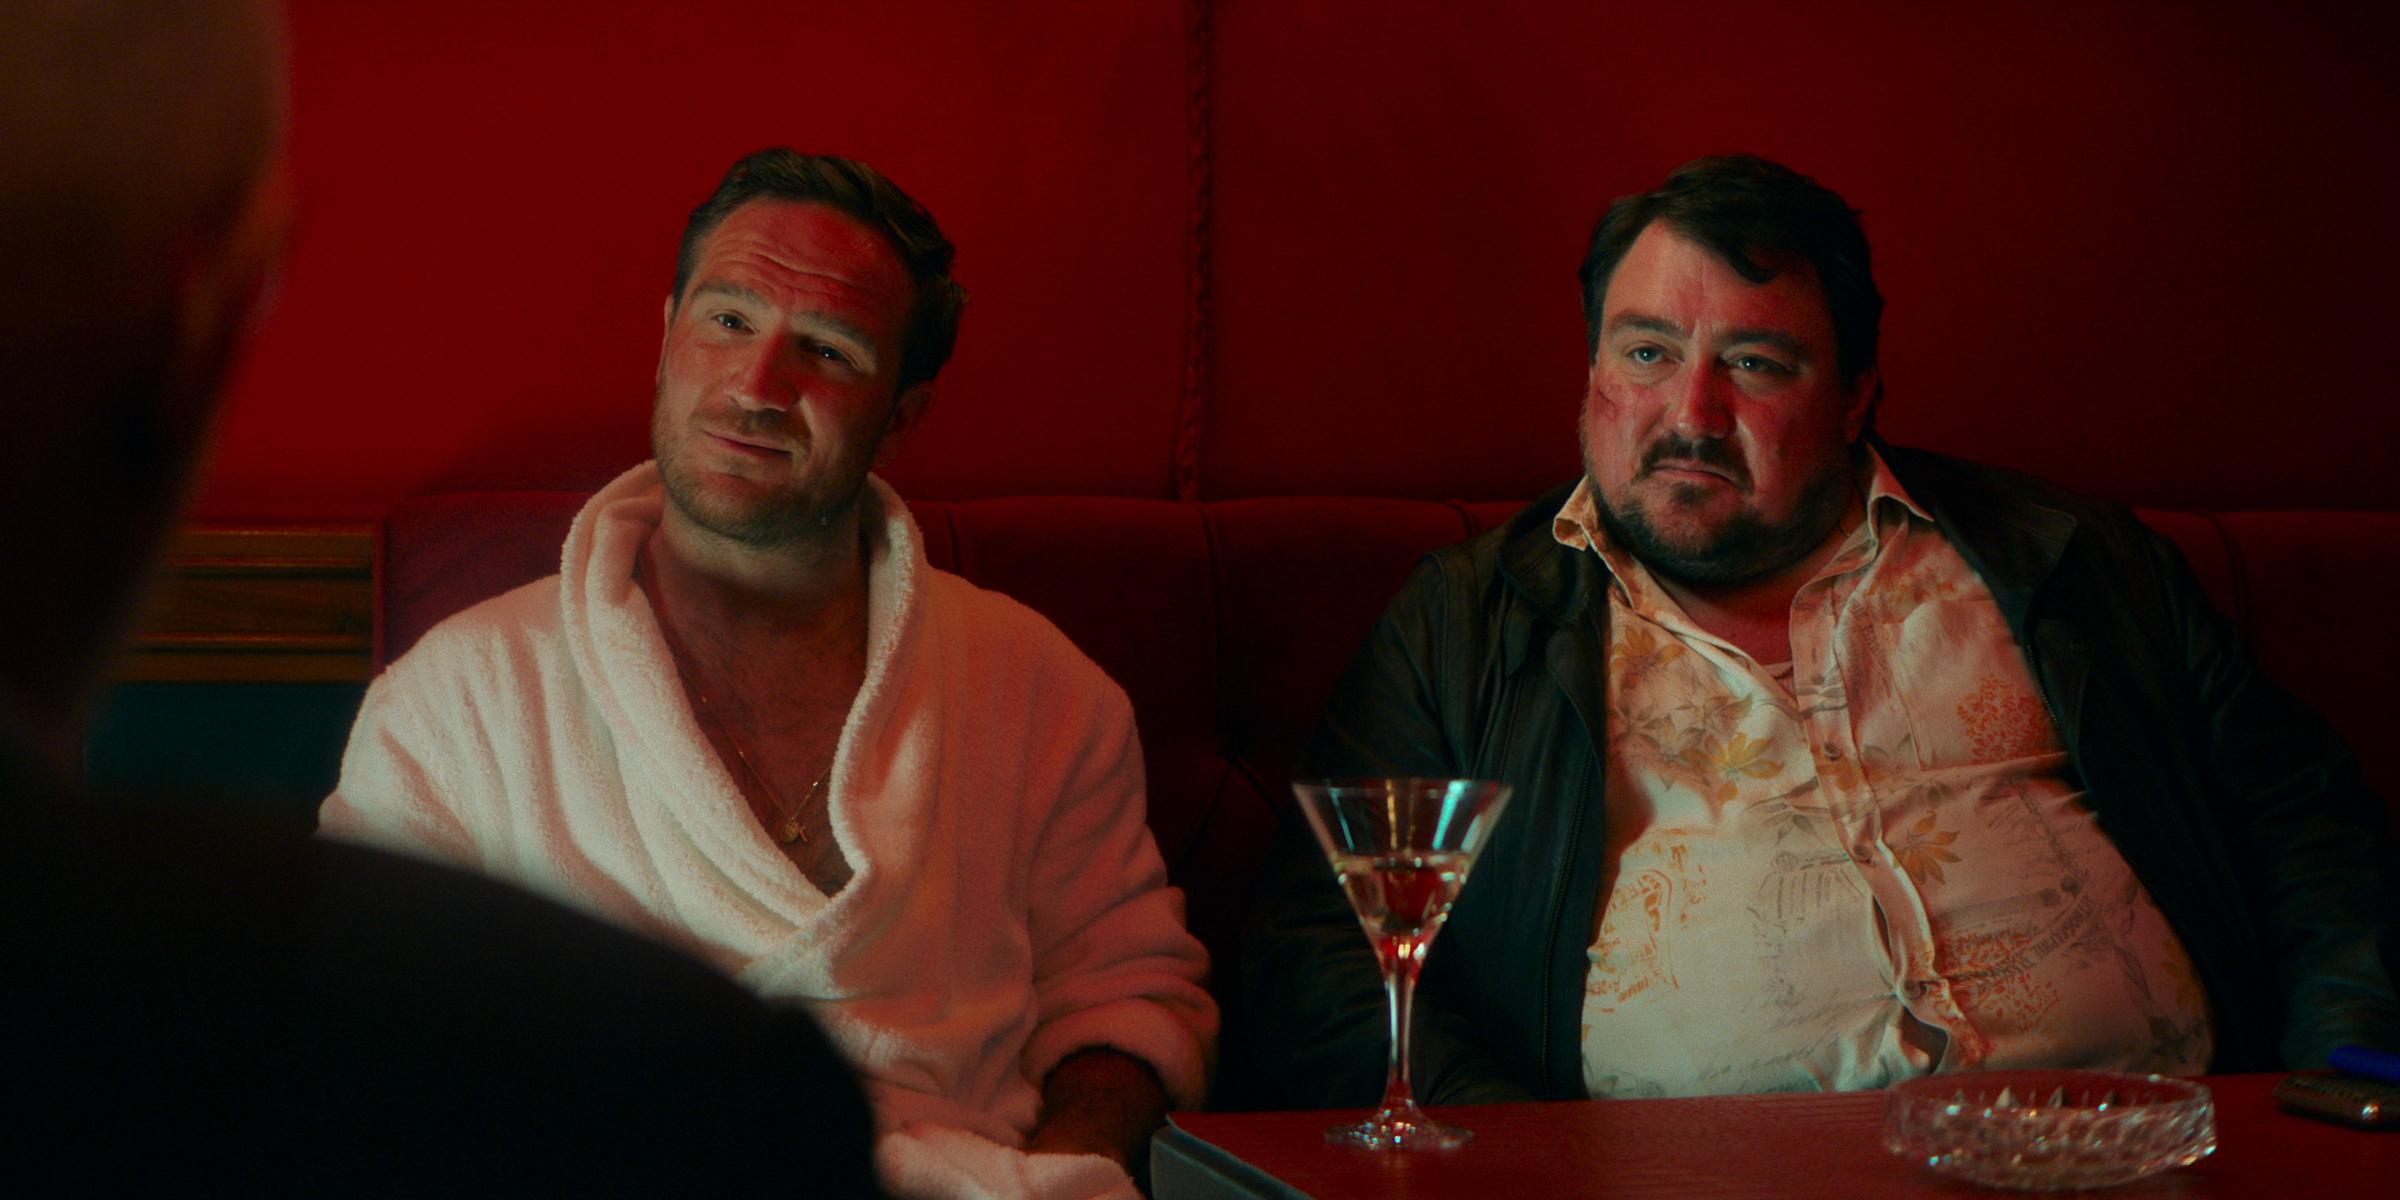 Frederik Lau as Charly and Christoph Krutzler as Joseph in Crooks.